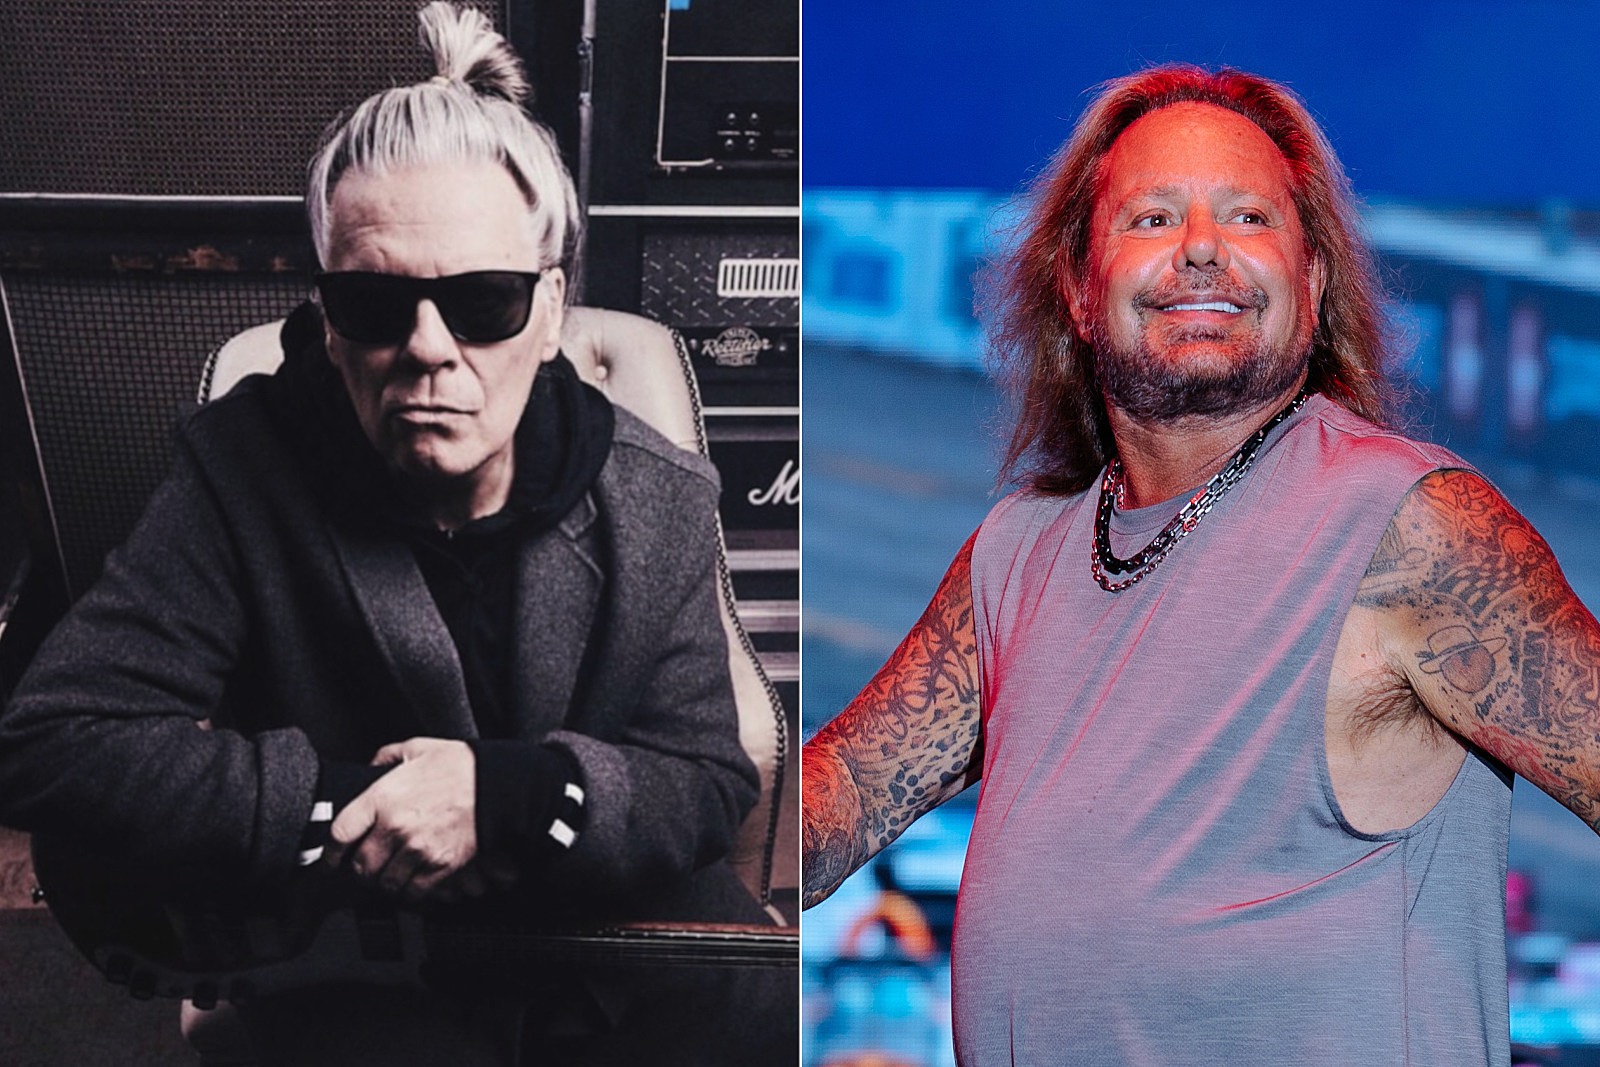 How Vince Neil Beat Motley Crue to the Punch With 'Exposed'